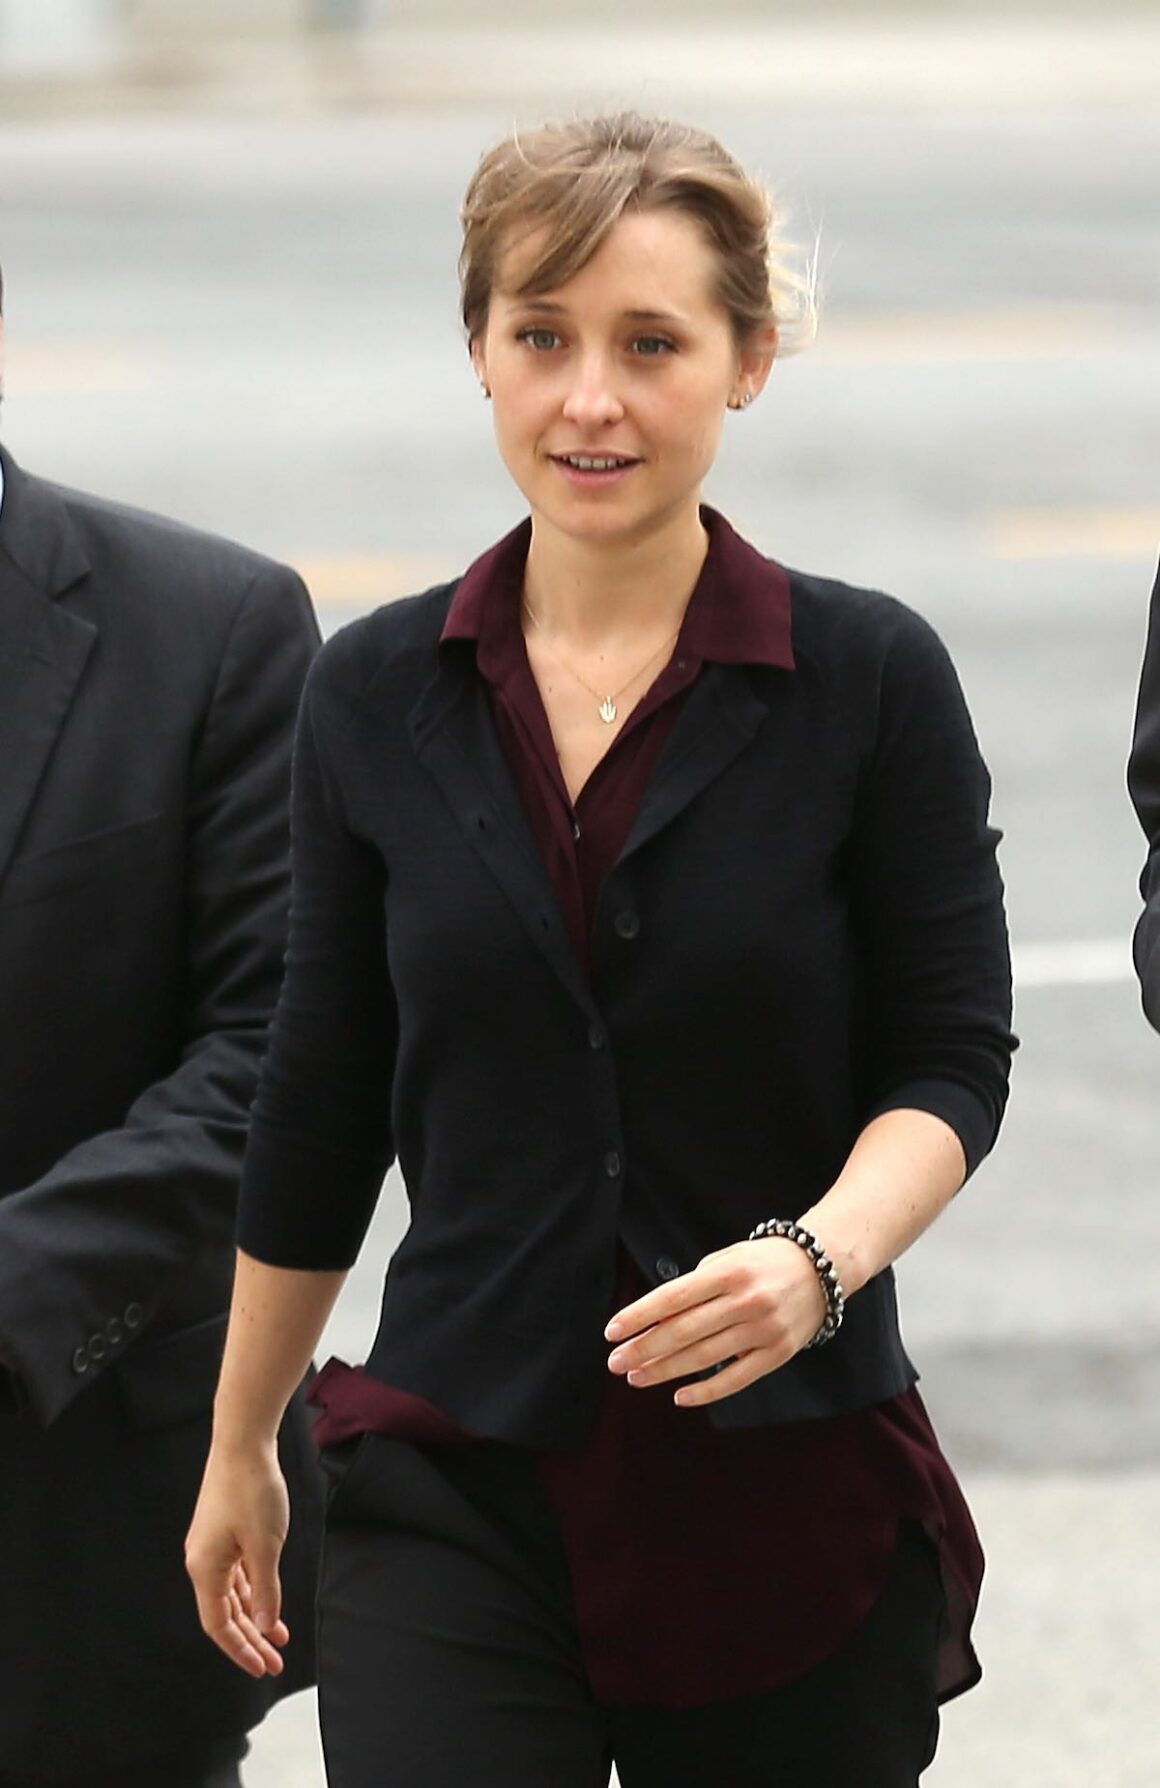 Actress Allison Mack arrives in court on sex trafficking charges